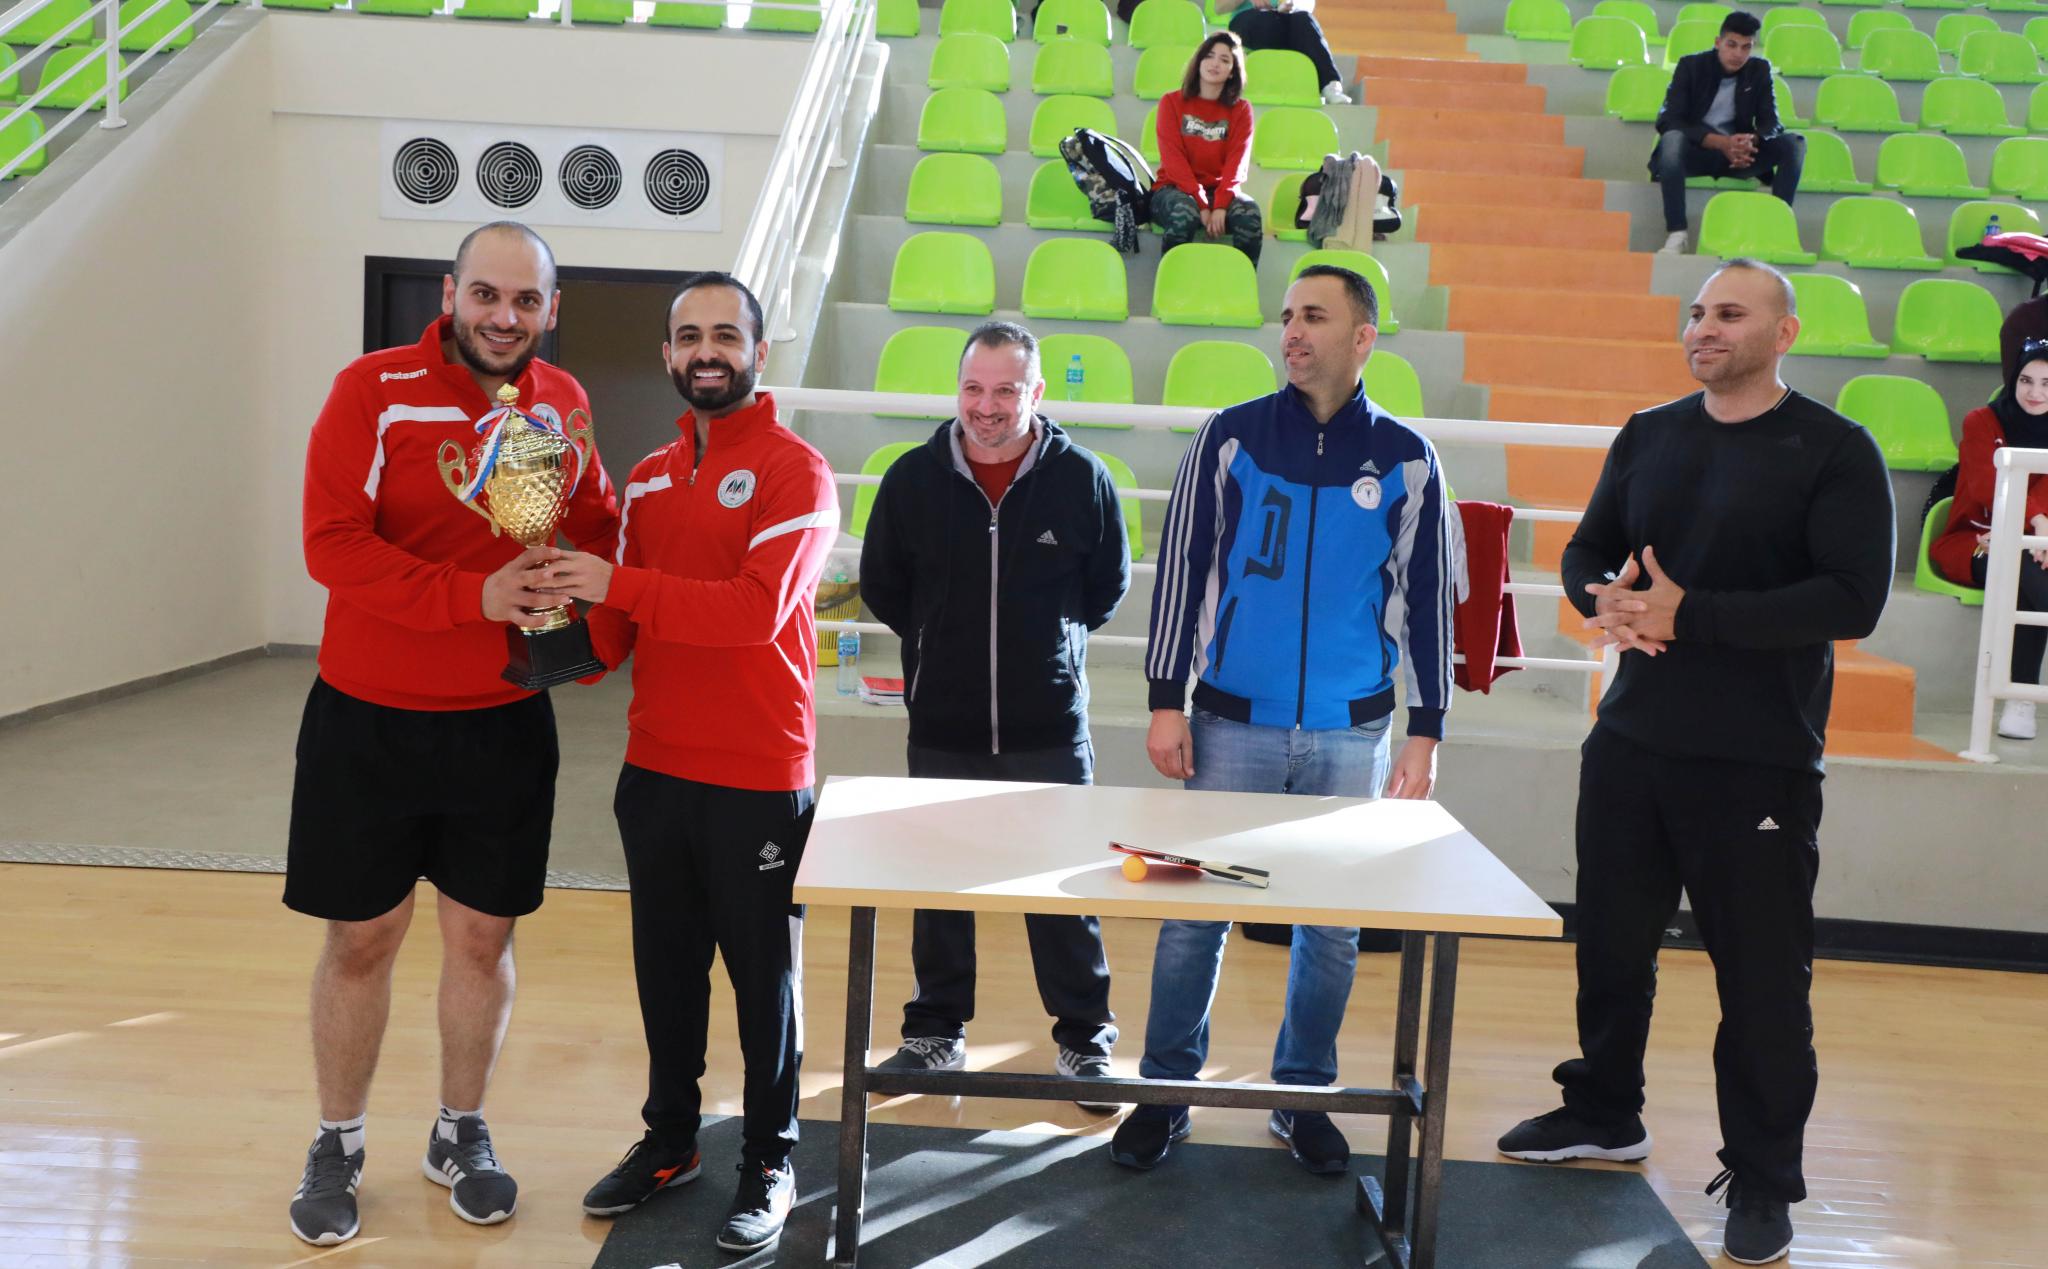 Photos of the Table Tennis Championship for University Employees